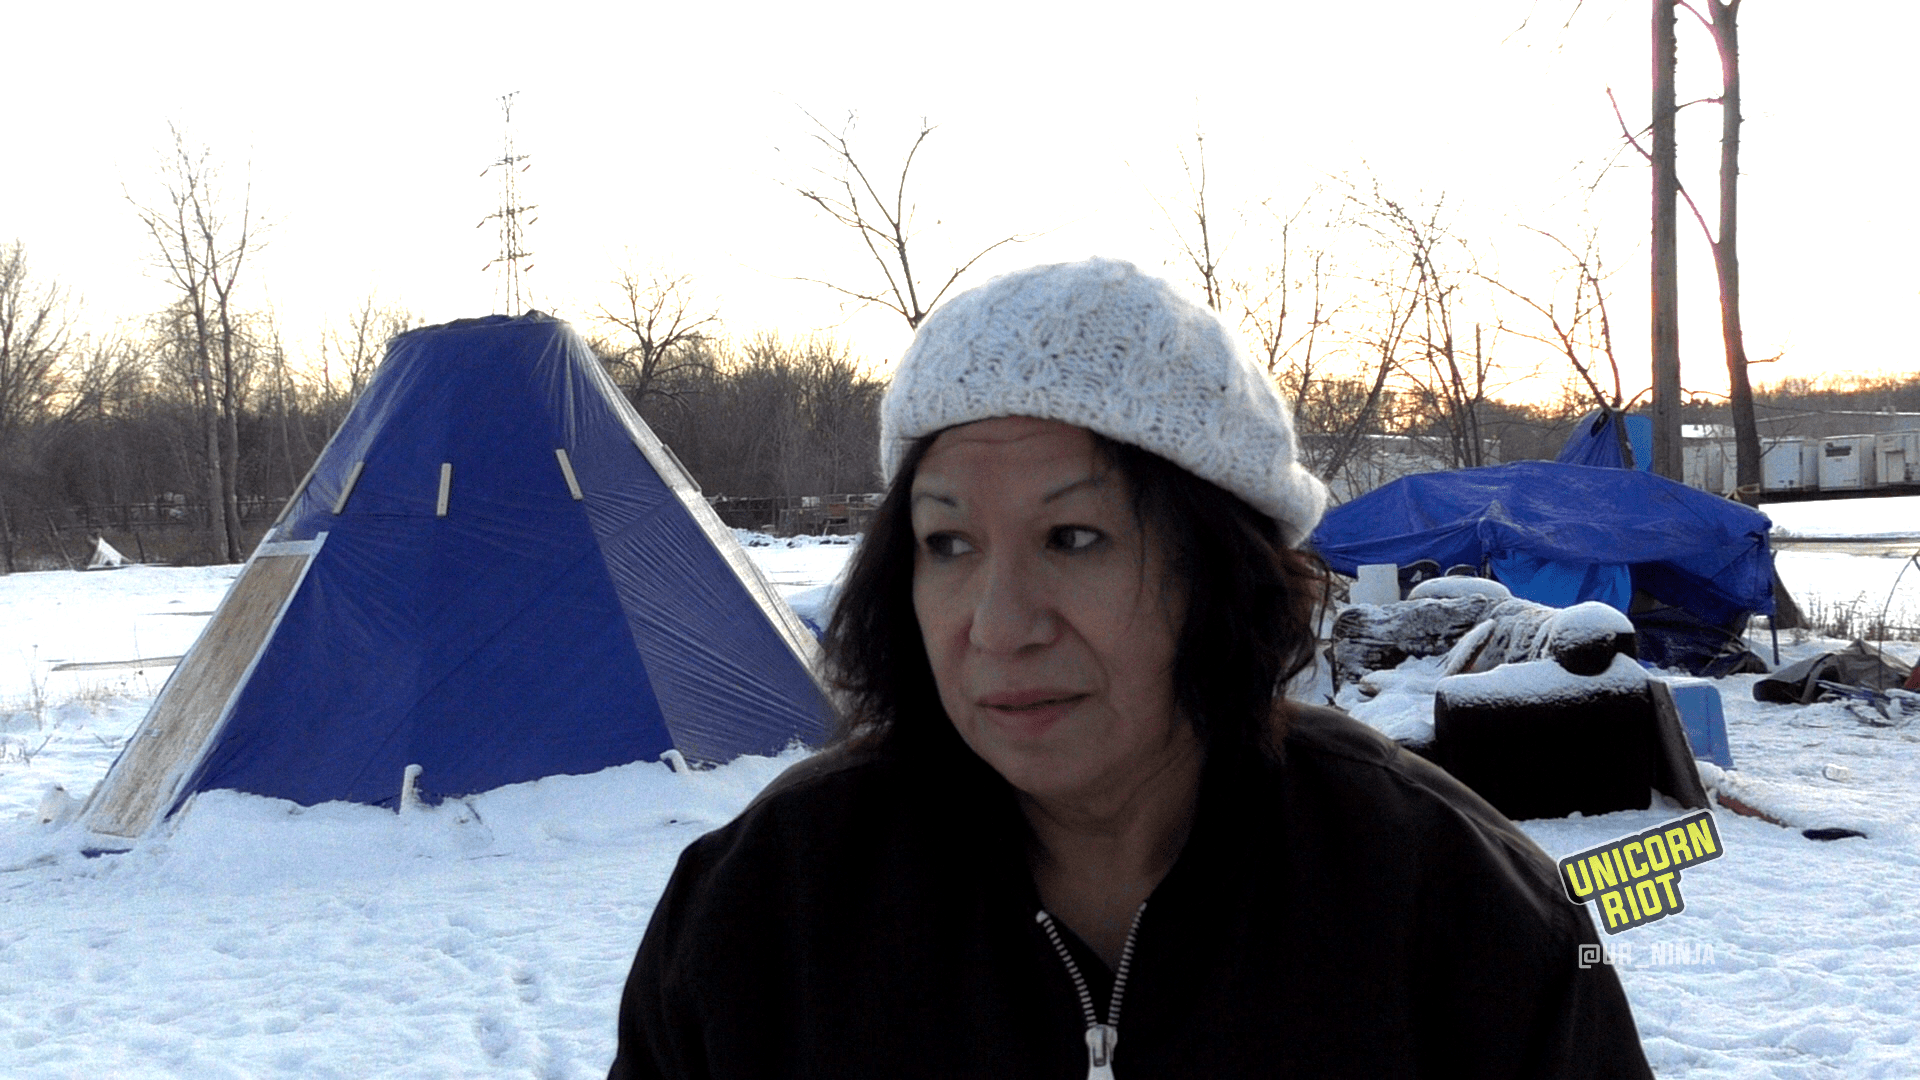 image: Brenda a 60-year-old Native American woman speaks in the center of the frame. She is wearing a white knit hat and a black zip-up jacket. Behind her on the ground is white snow, and to her left in the background is an Indigenous structure known as a Tarpee, a tipi-like structure made with tarps constructed to help elders keep warm while fighting oil pipeline extraction on Native land.